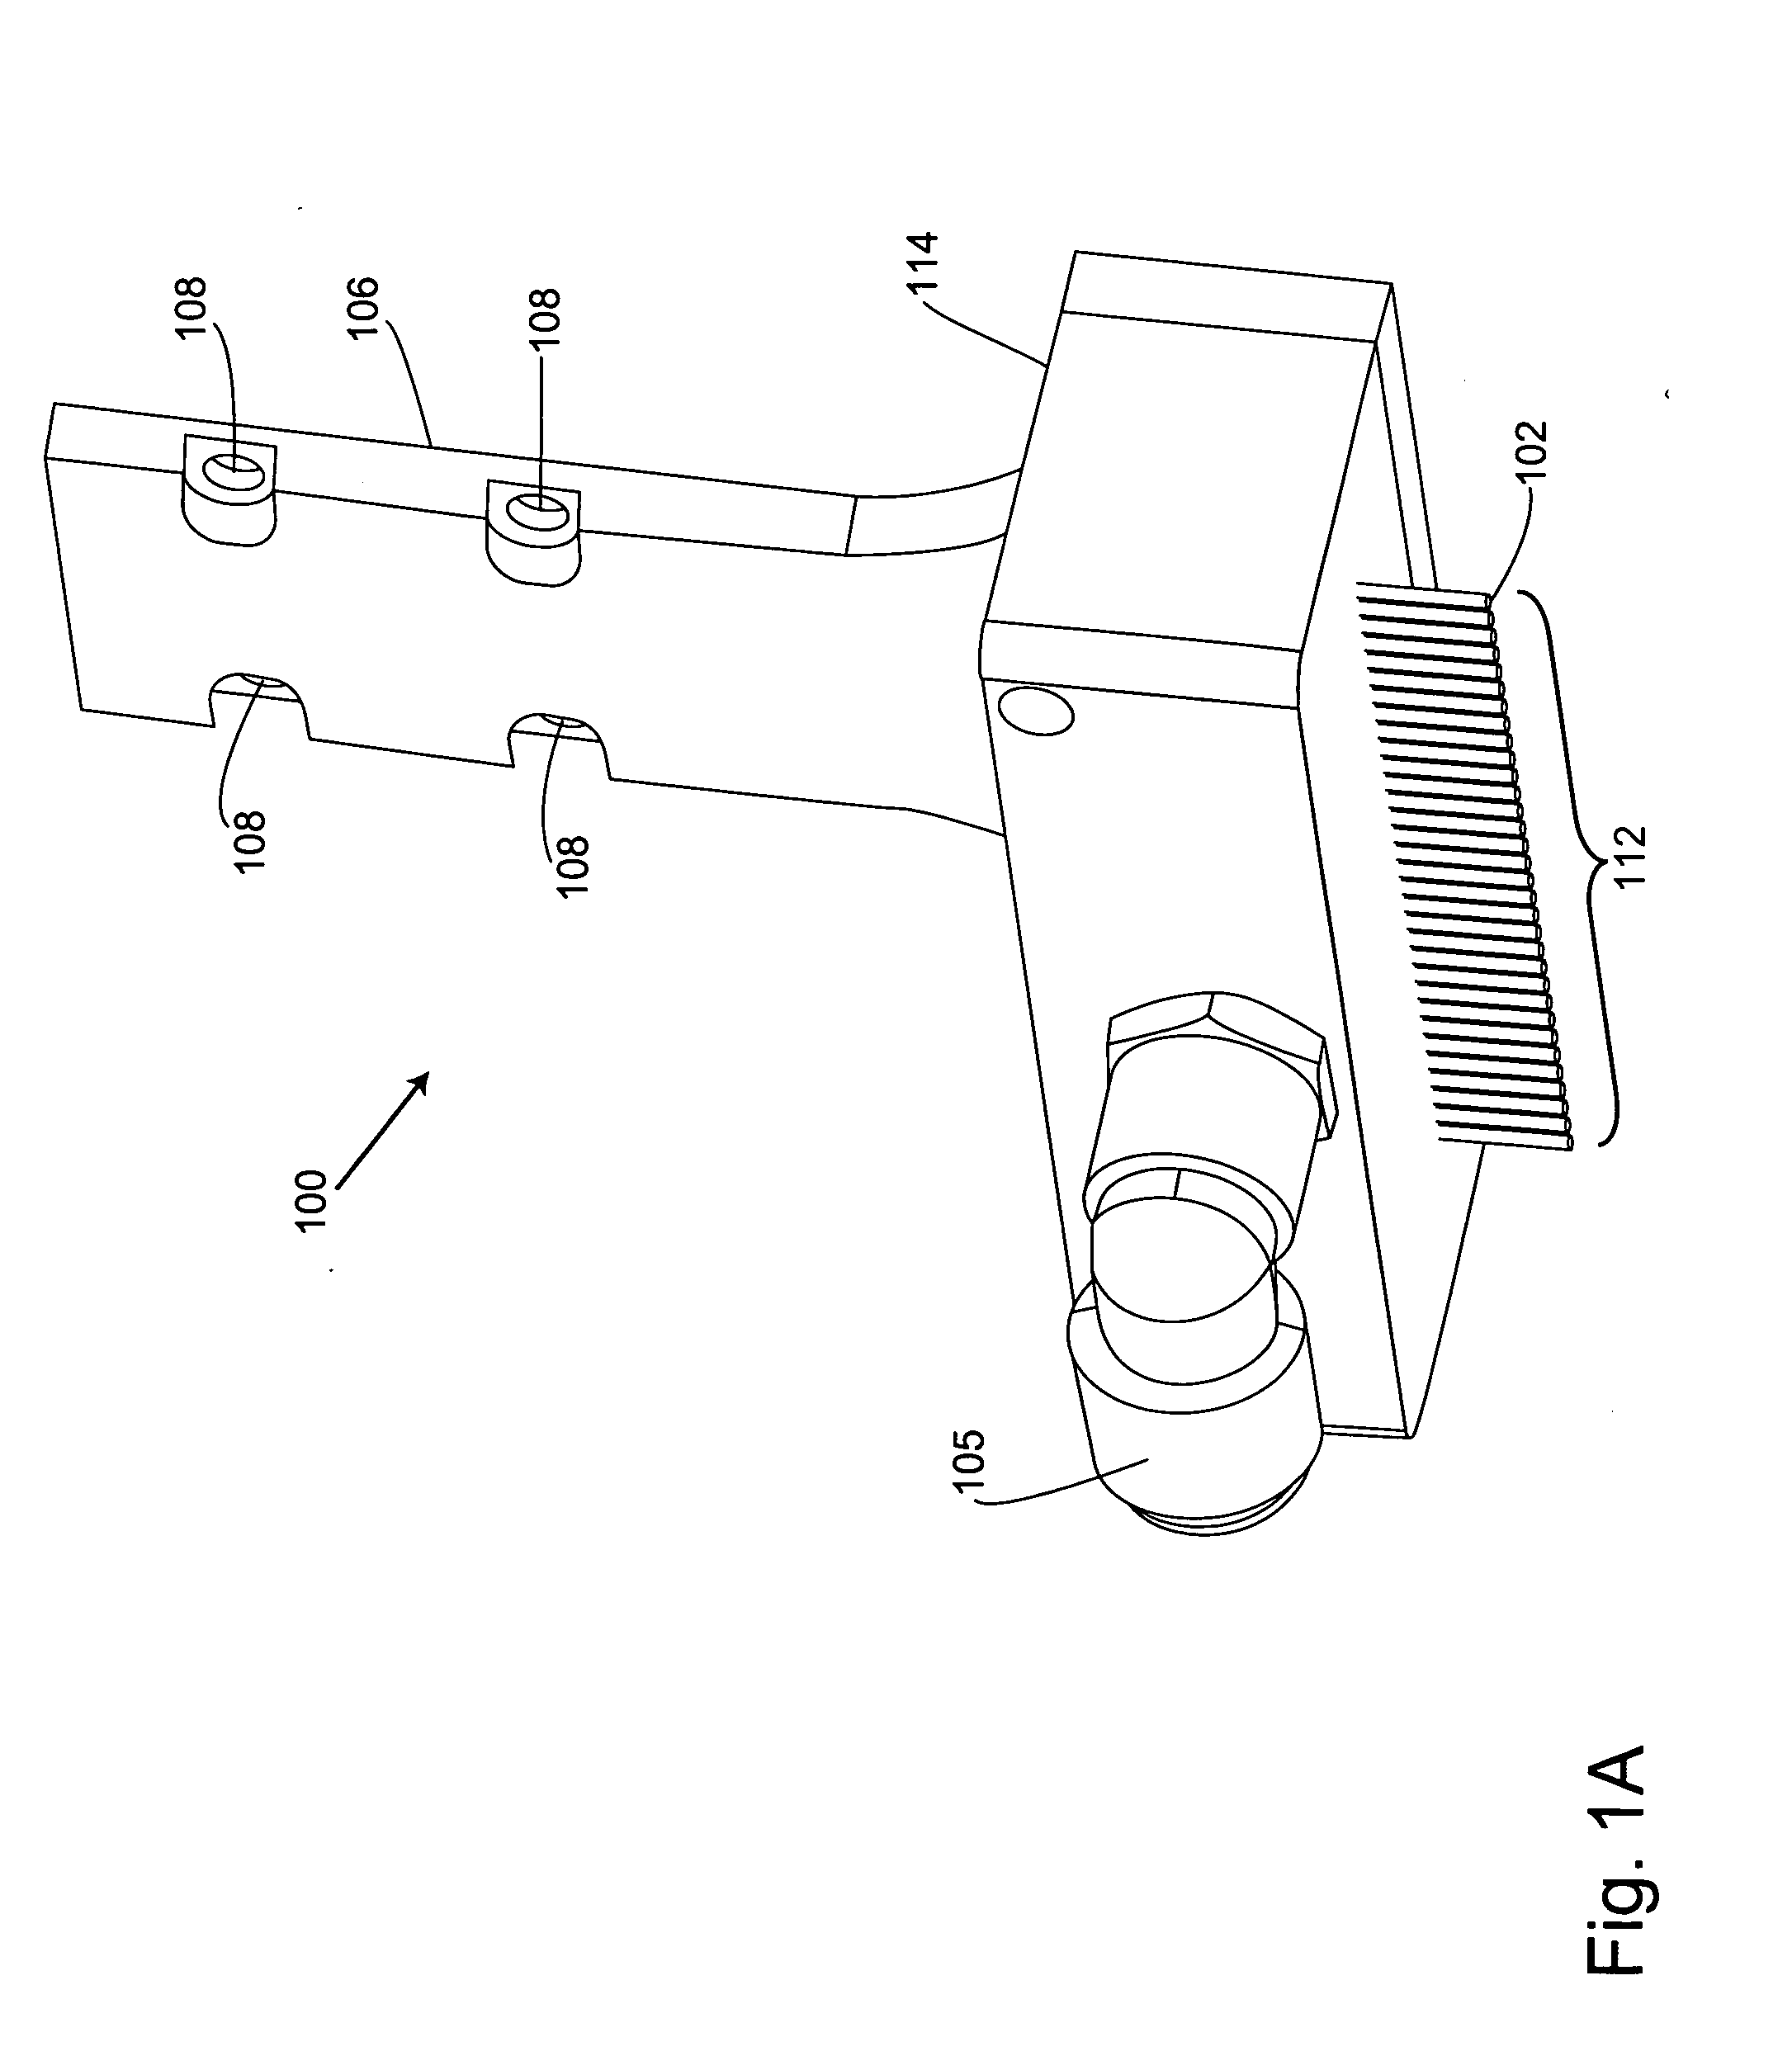 Multi-well container processing systems, system components, and related methods